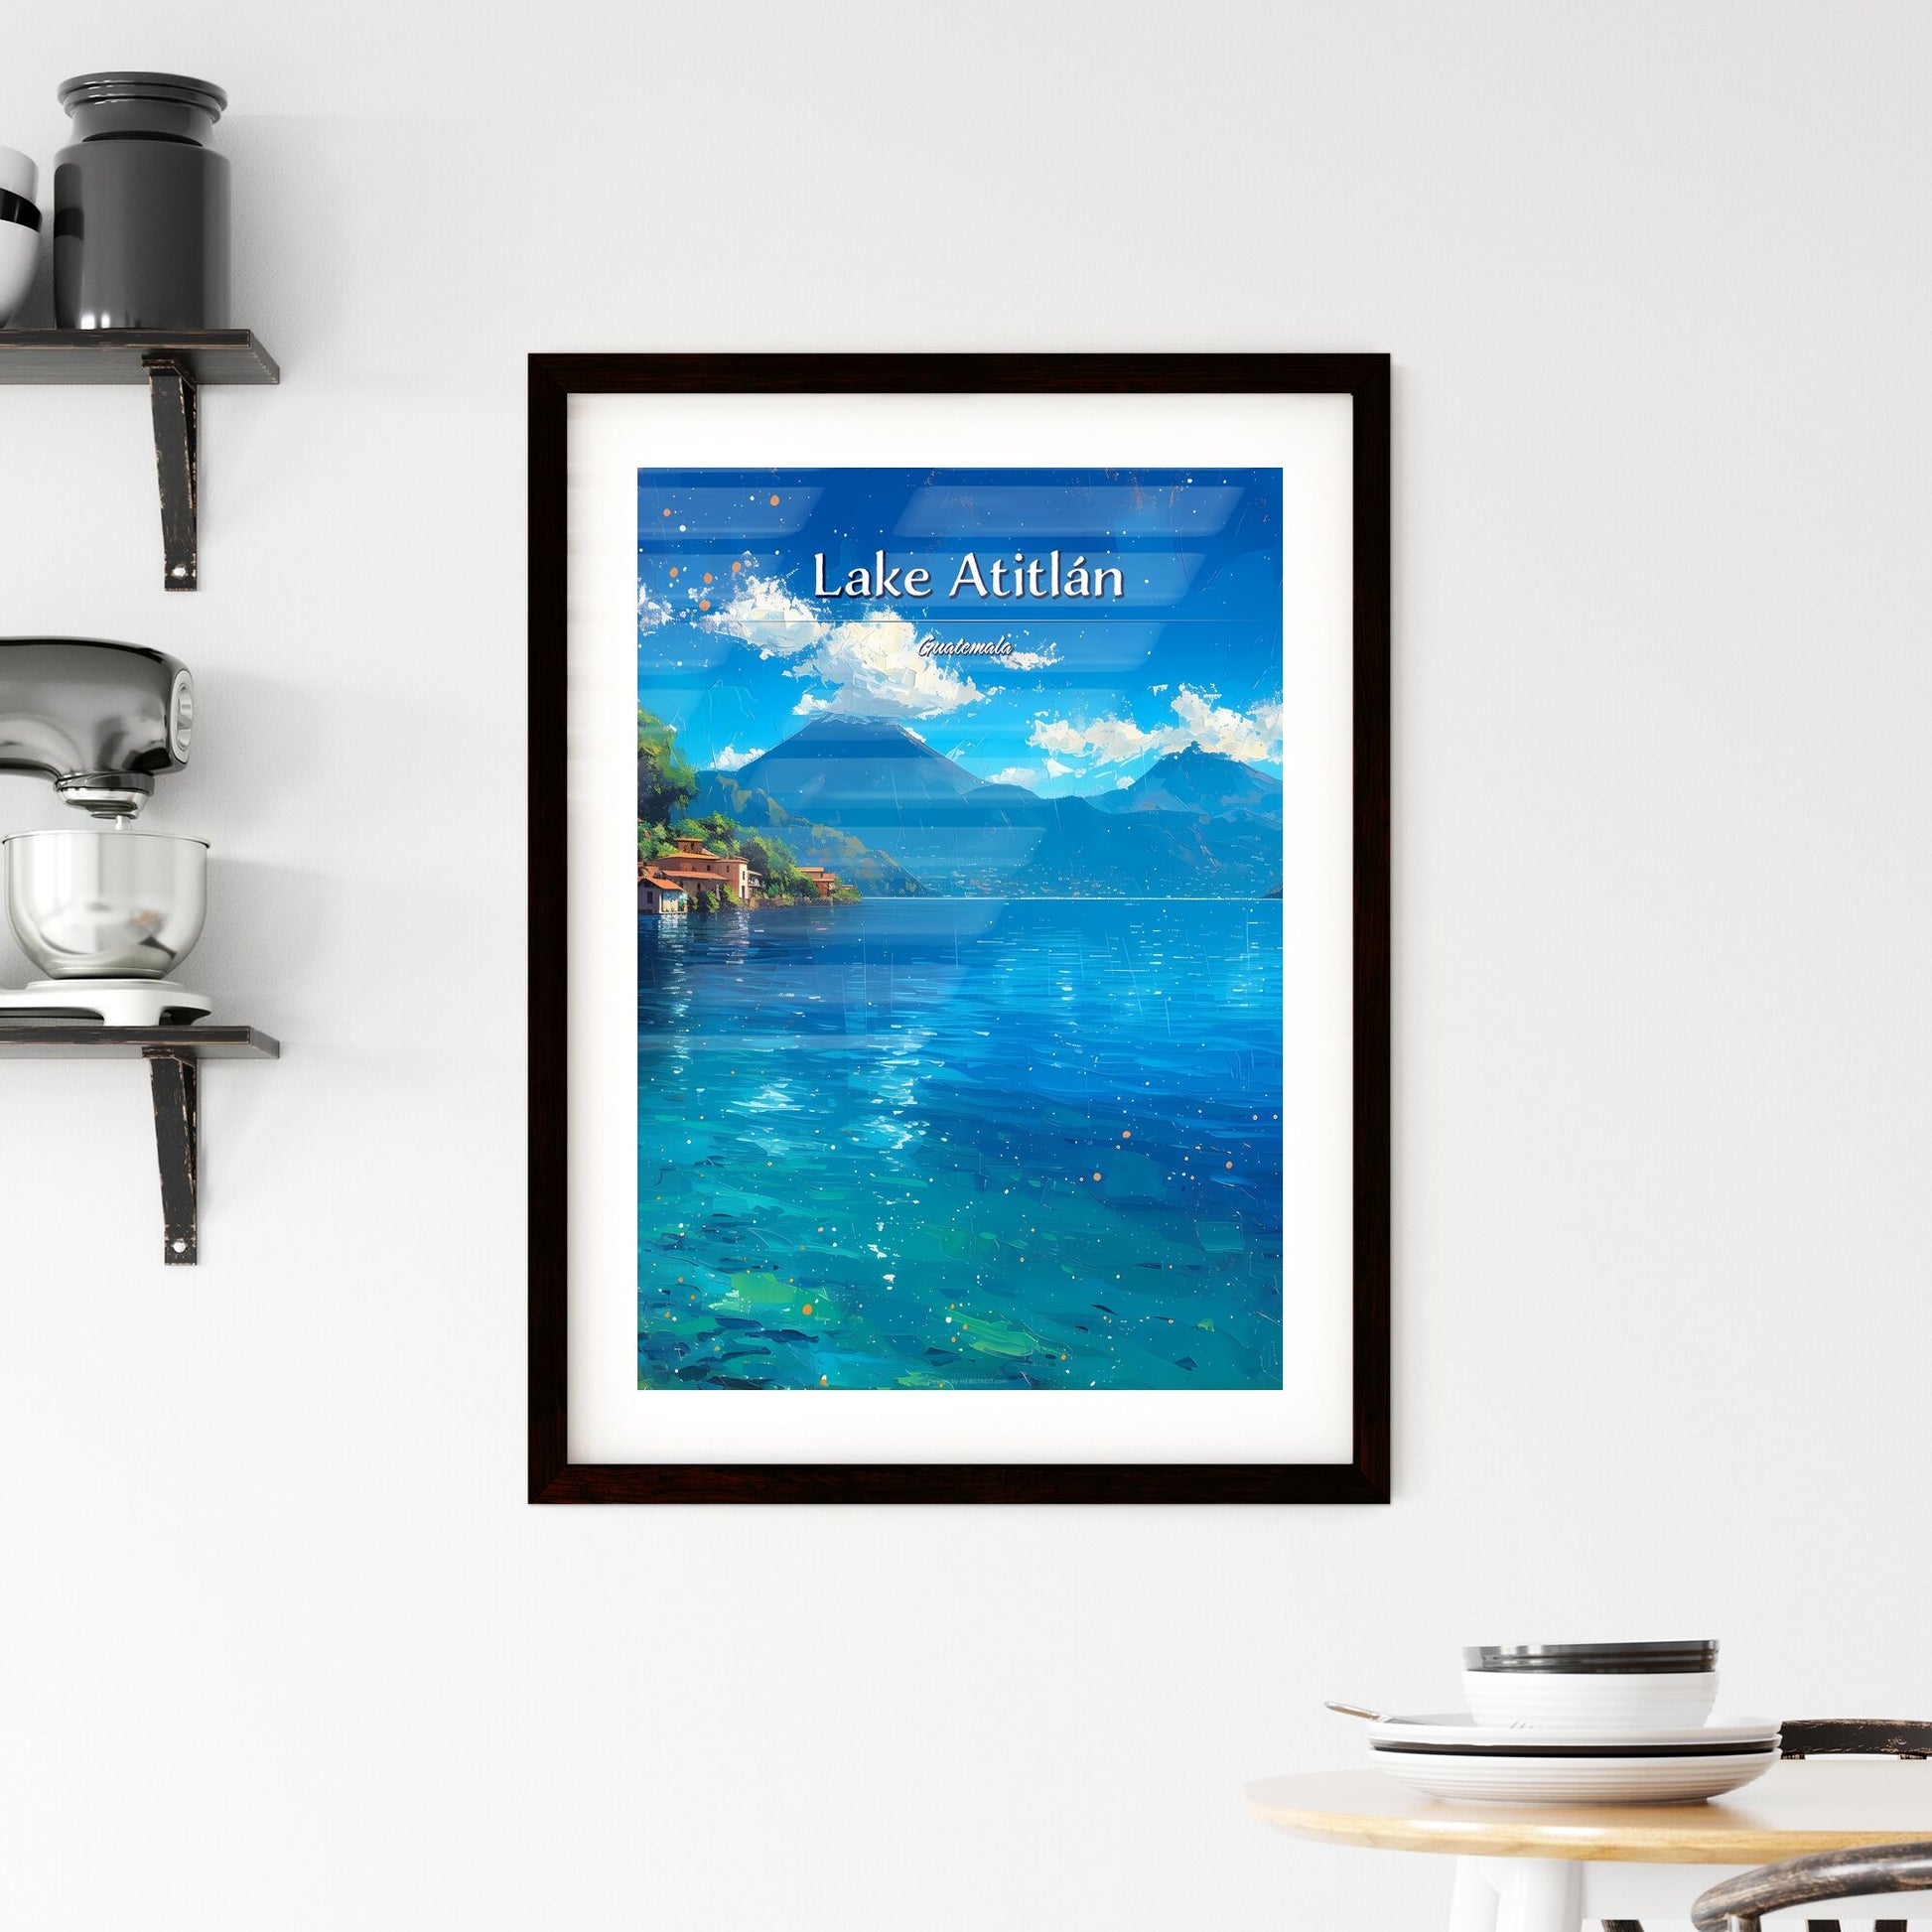 Lake Atitlán, Guatemala - Art print of a lake with houses and mountains in the background Default Title